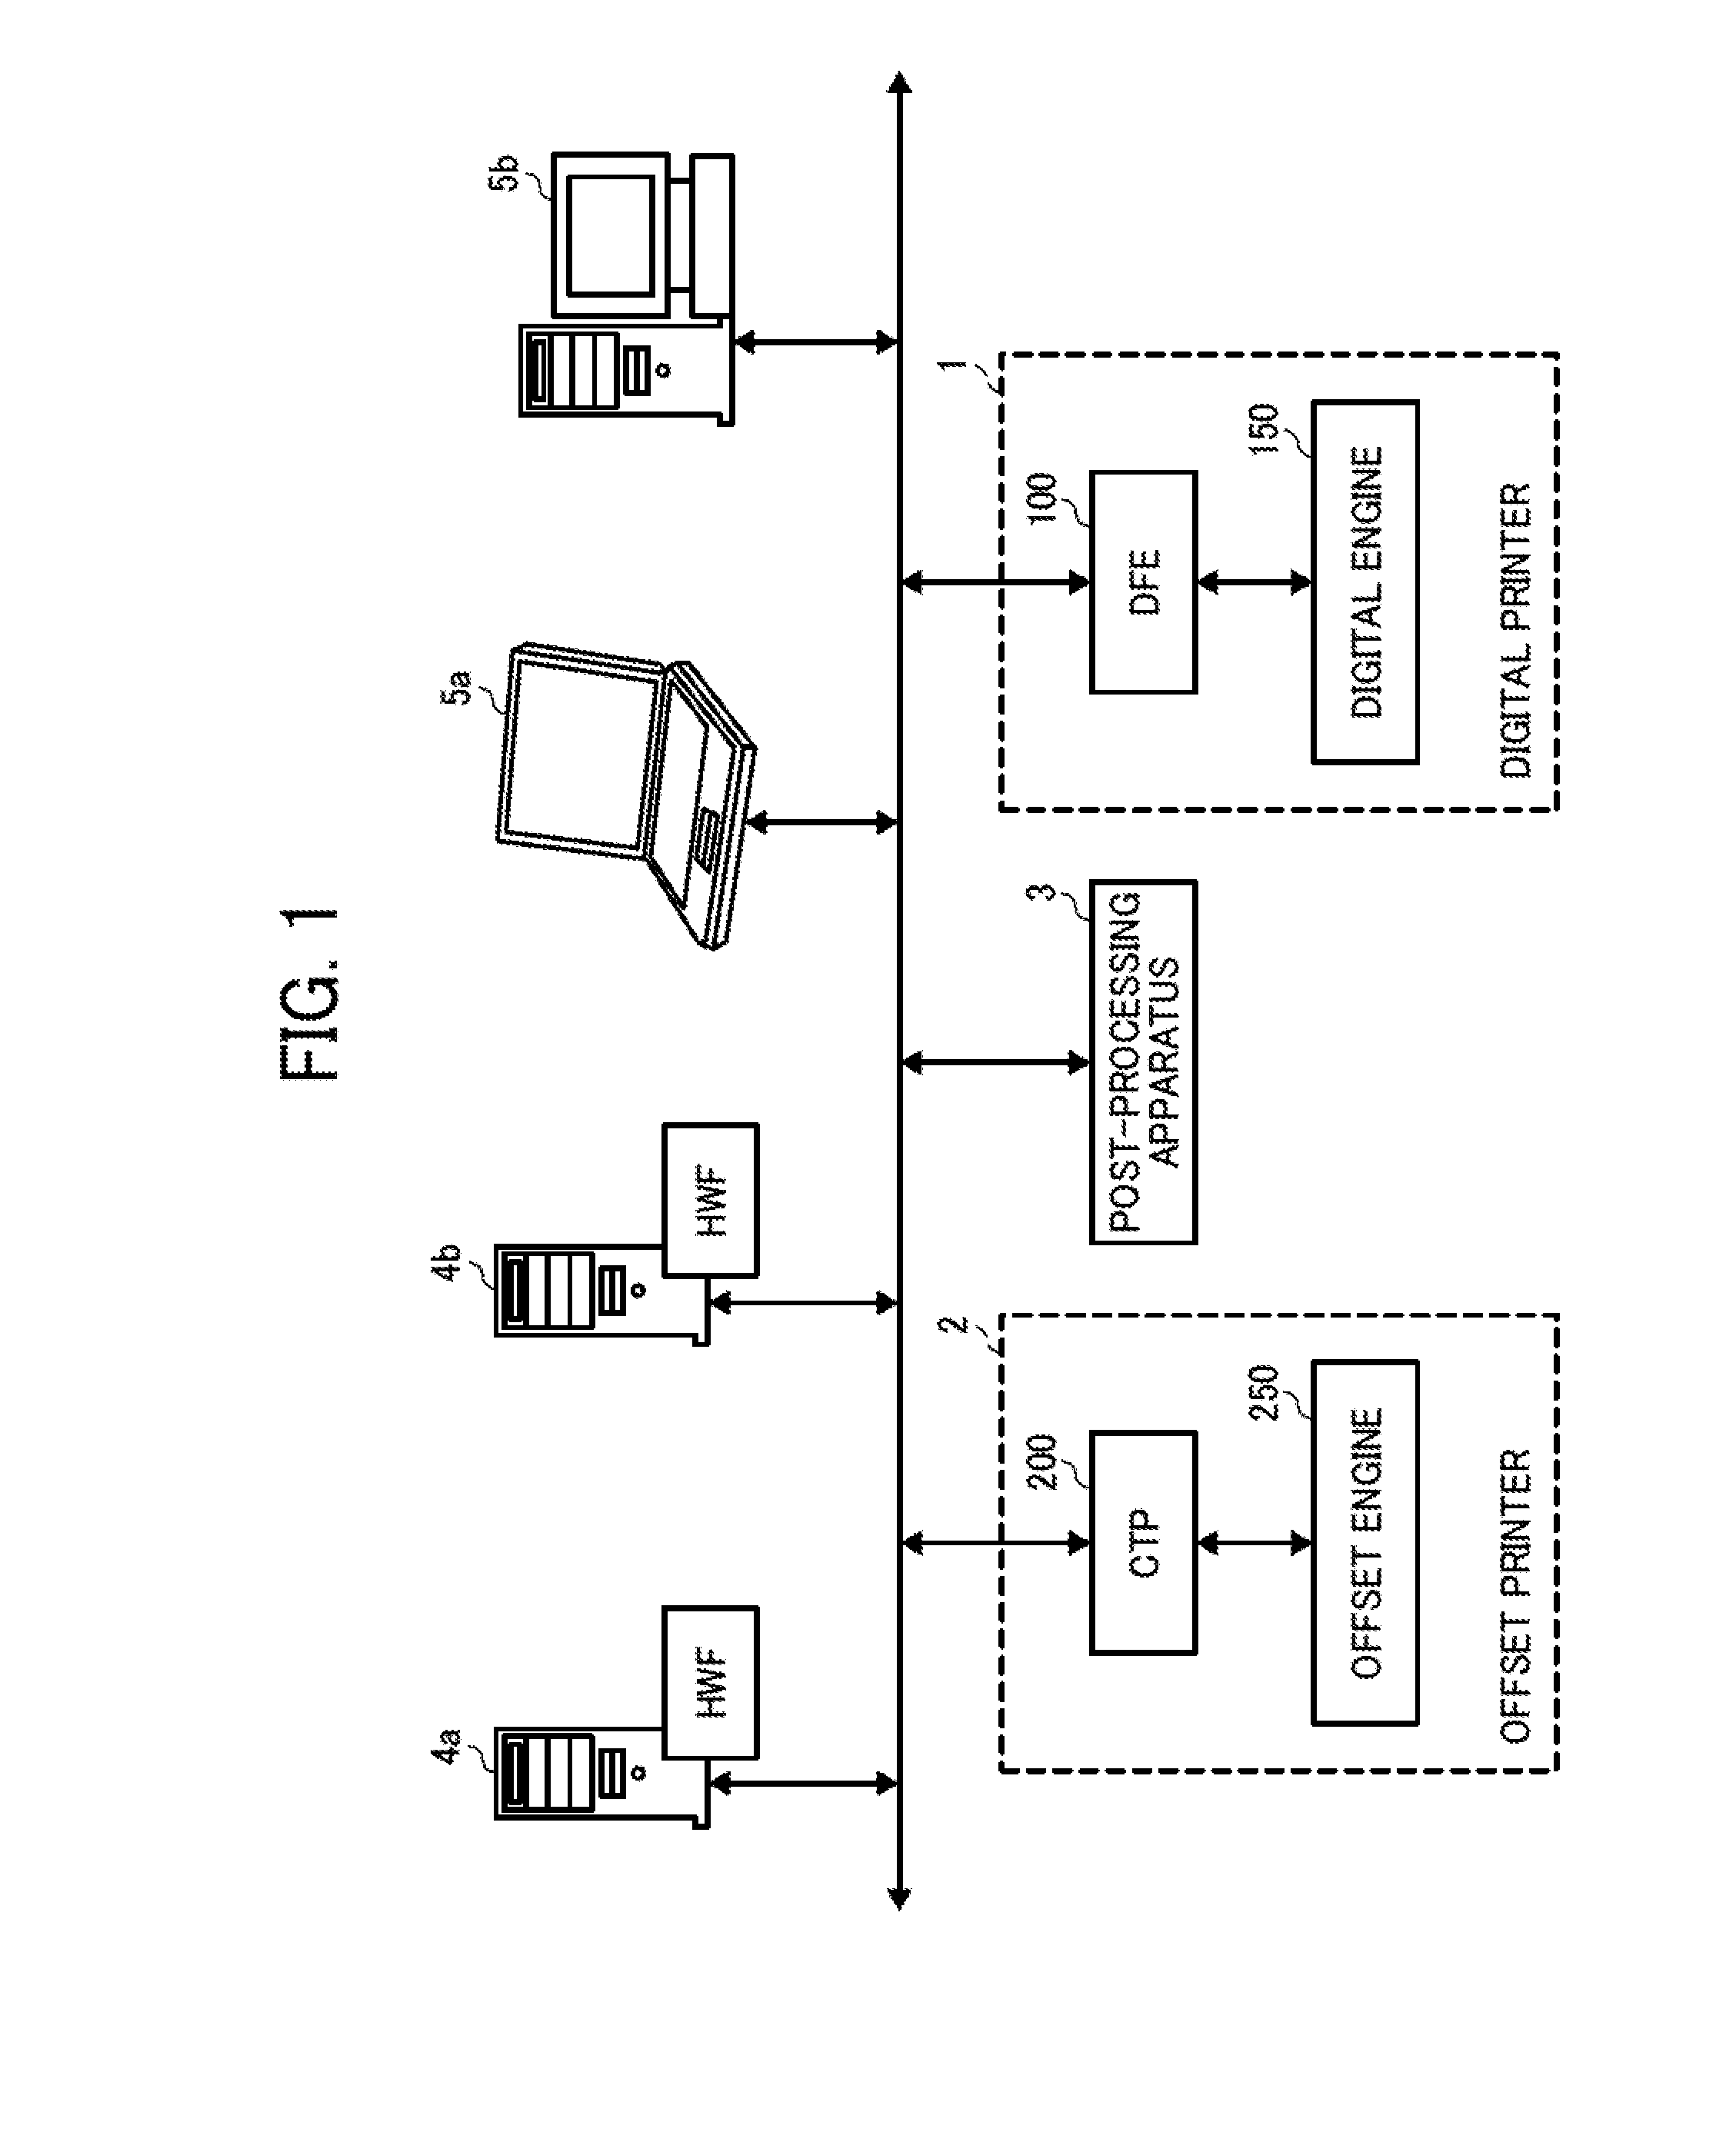 Image processing system, process execution control apparatus, and image generation-output control apparatus